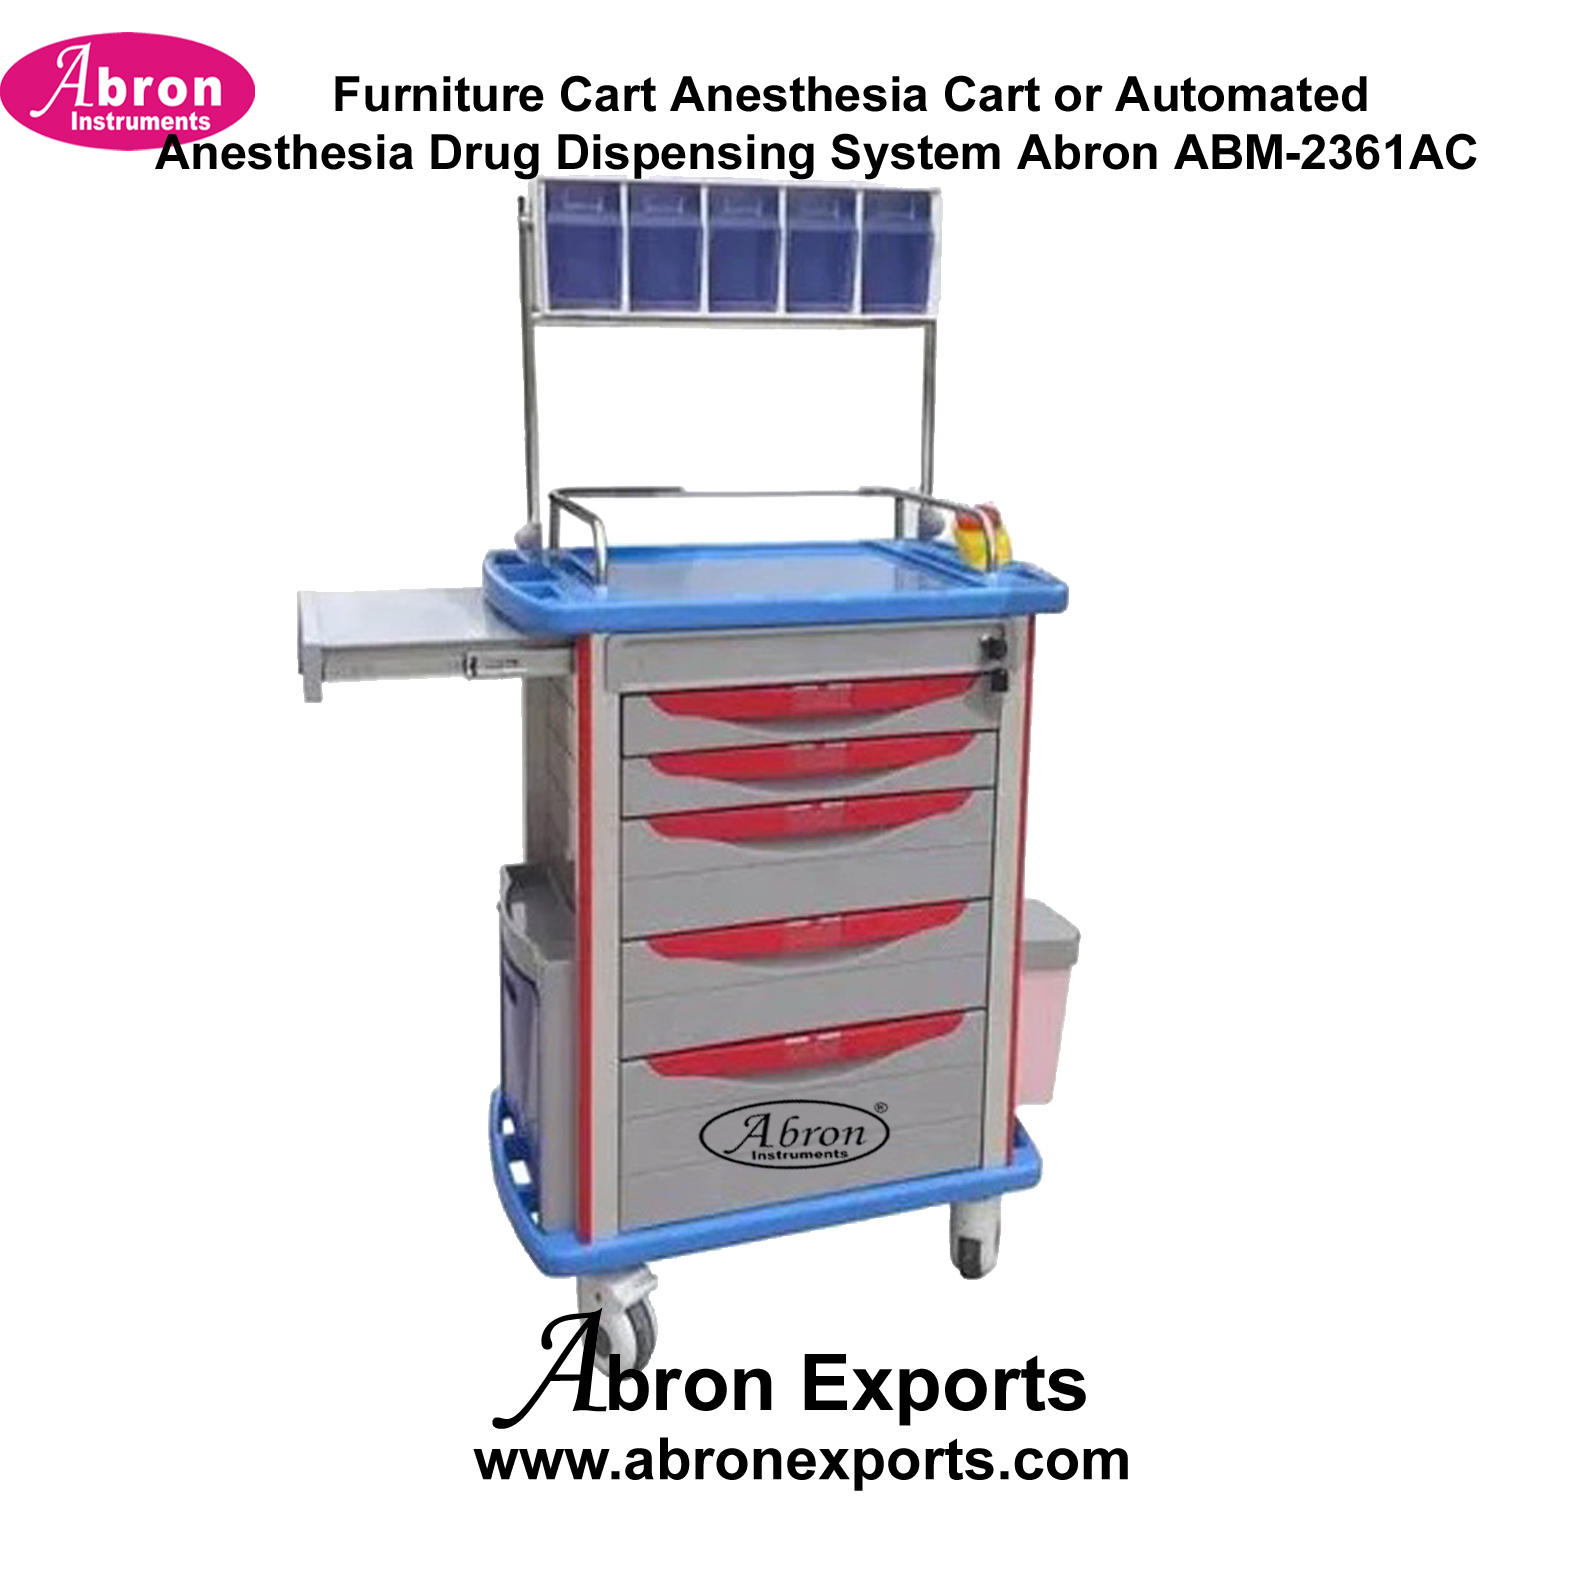 Furniture Cart Anesthesia Cart or Automated Anesthesia Drug Dispensing System Abron ABM-2361AC 